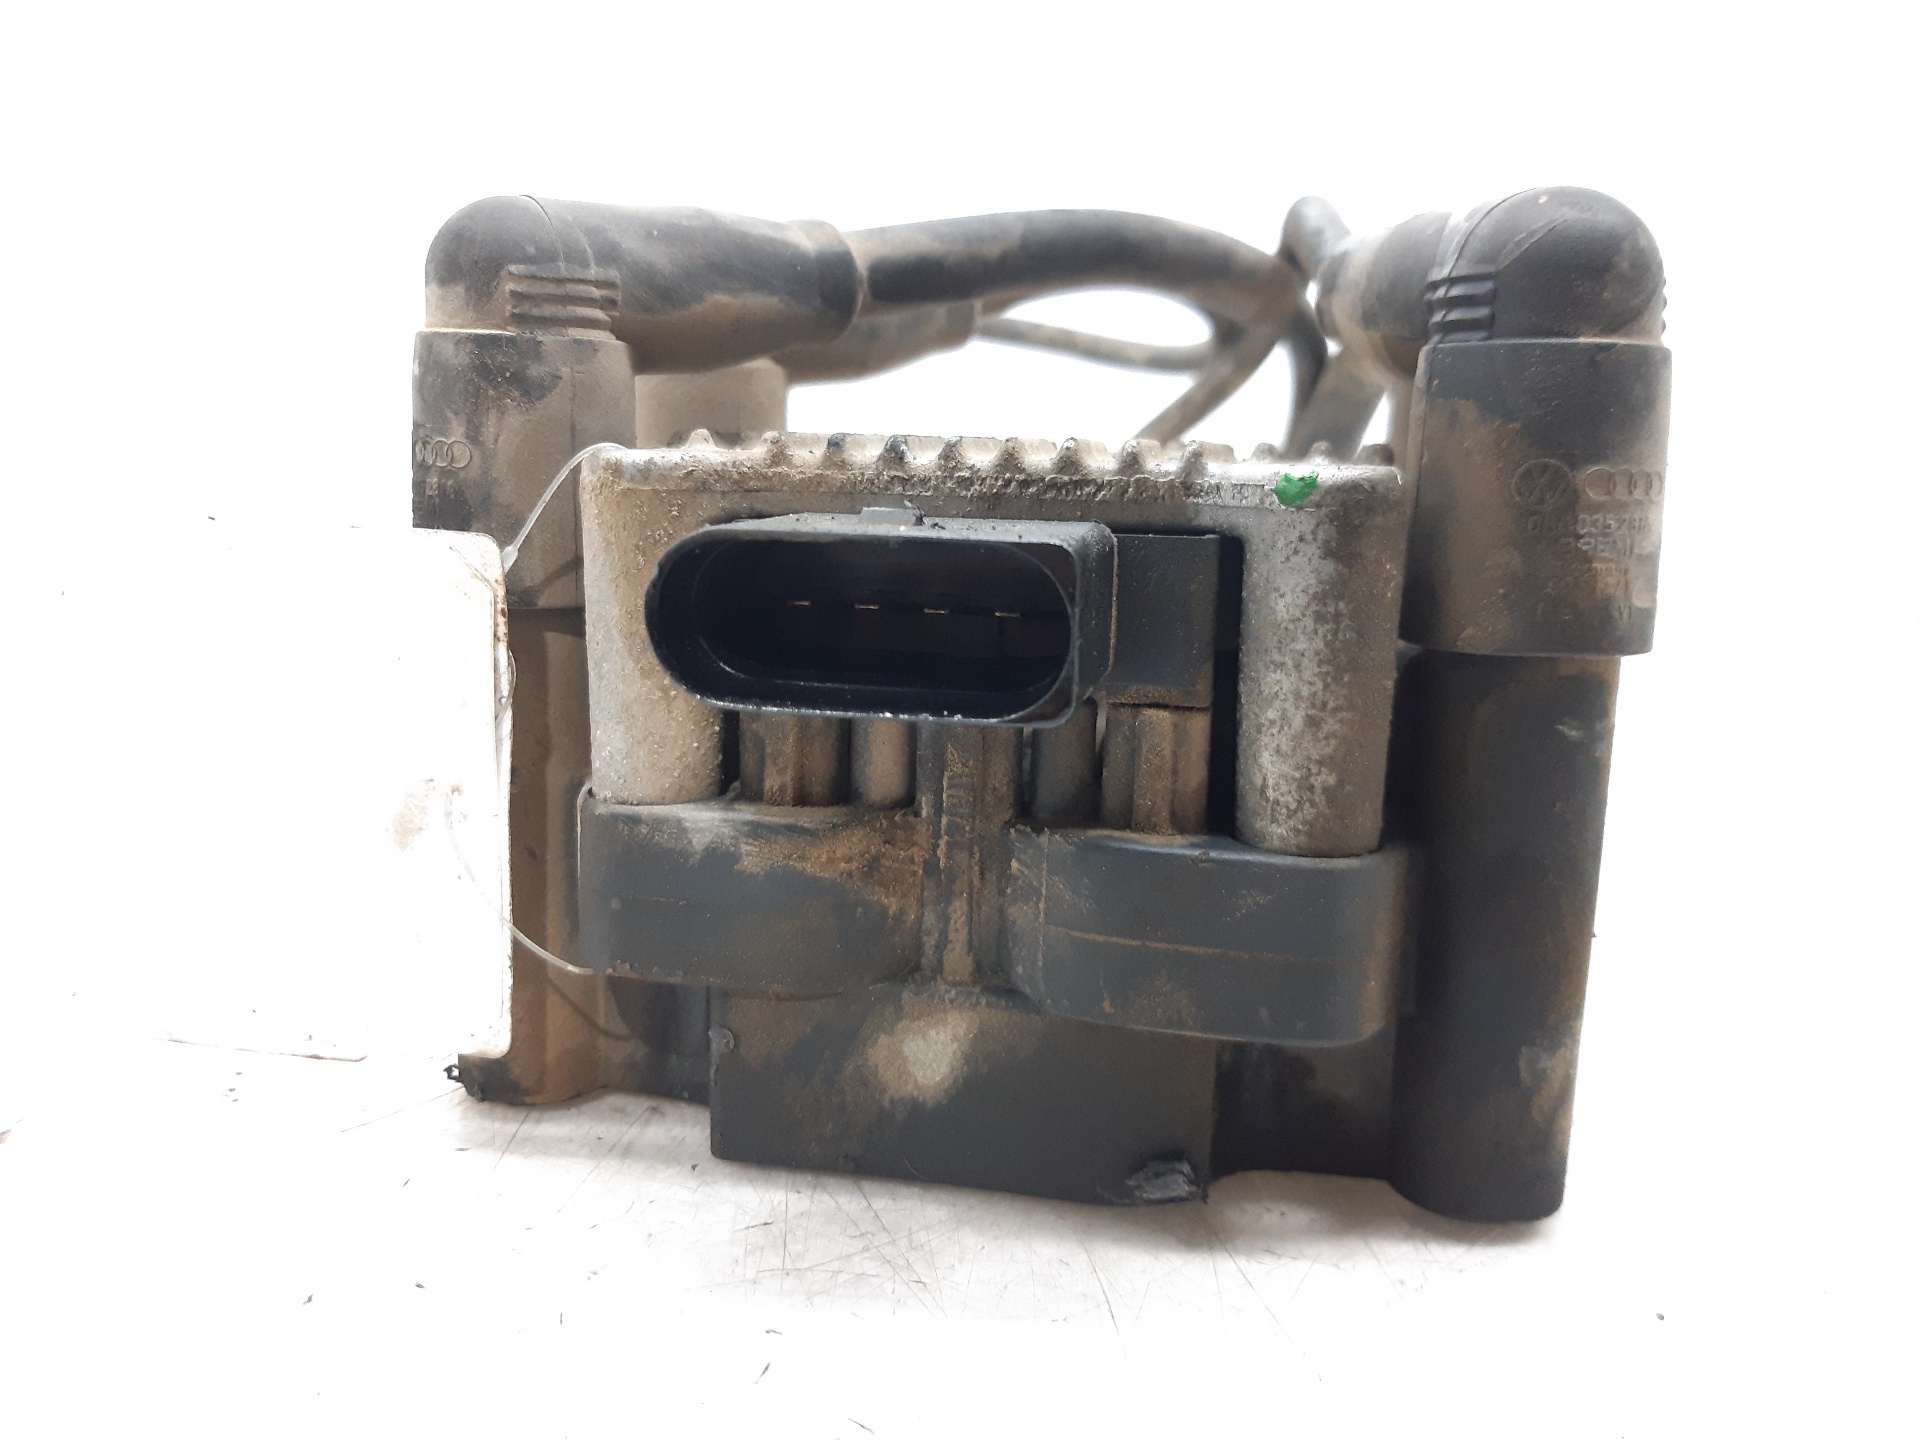 SEAT Leon 1 generation (1999-2005) High Voltage Ignition Coil 032905106B 18688378